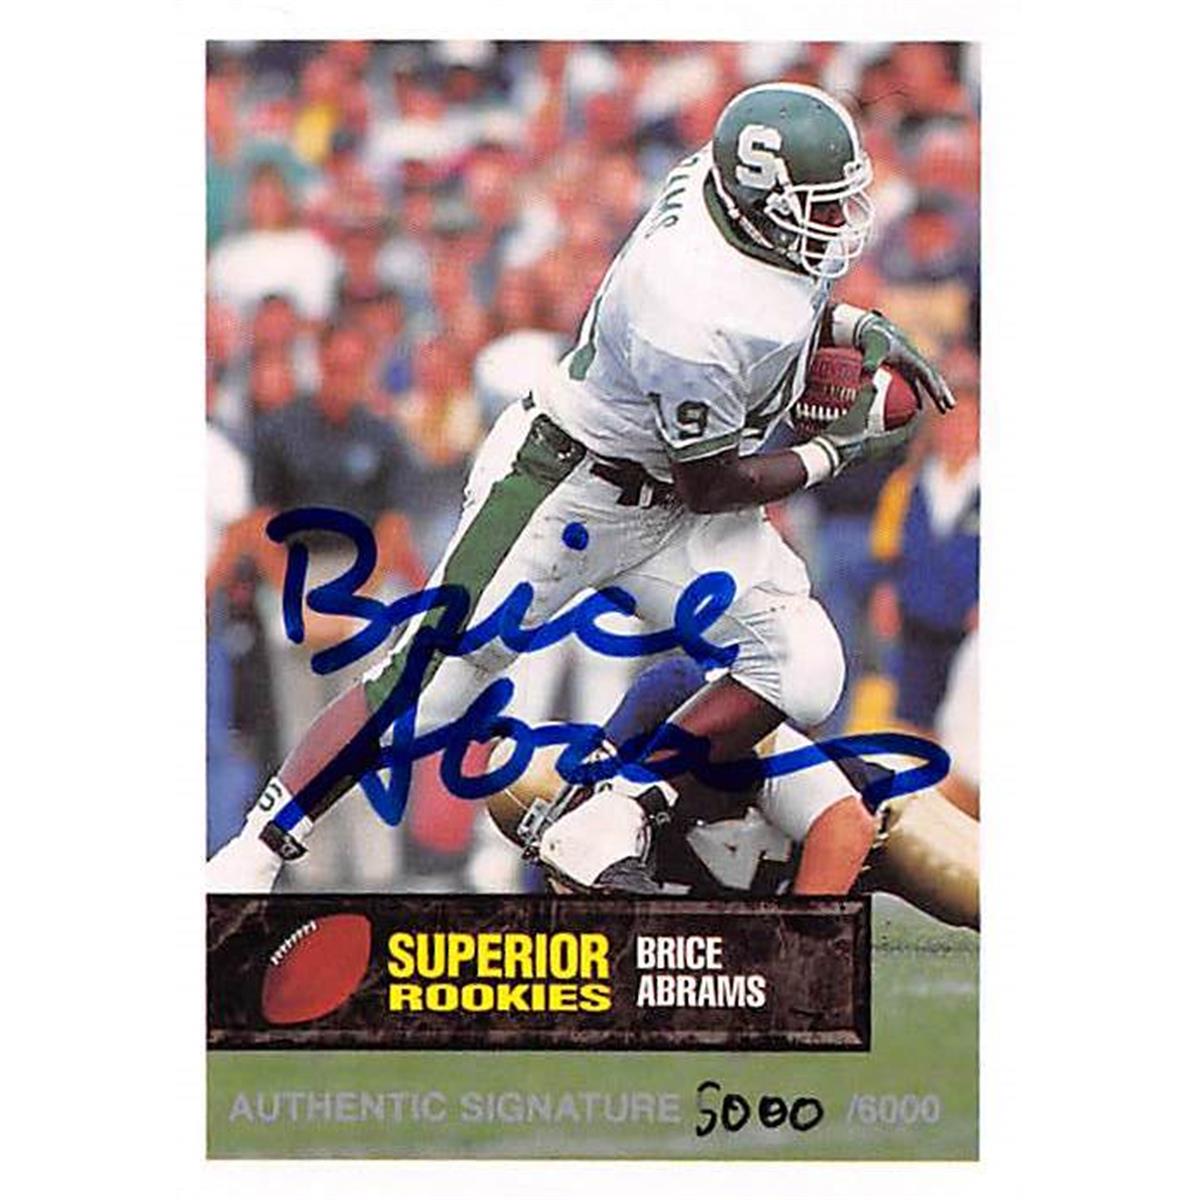 Picture of Autograph Warehouse 444610 Brice Abrams Autographed Football Card 1994 Superior Rookies No. 11 for Michigan State Spartans